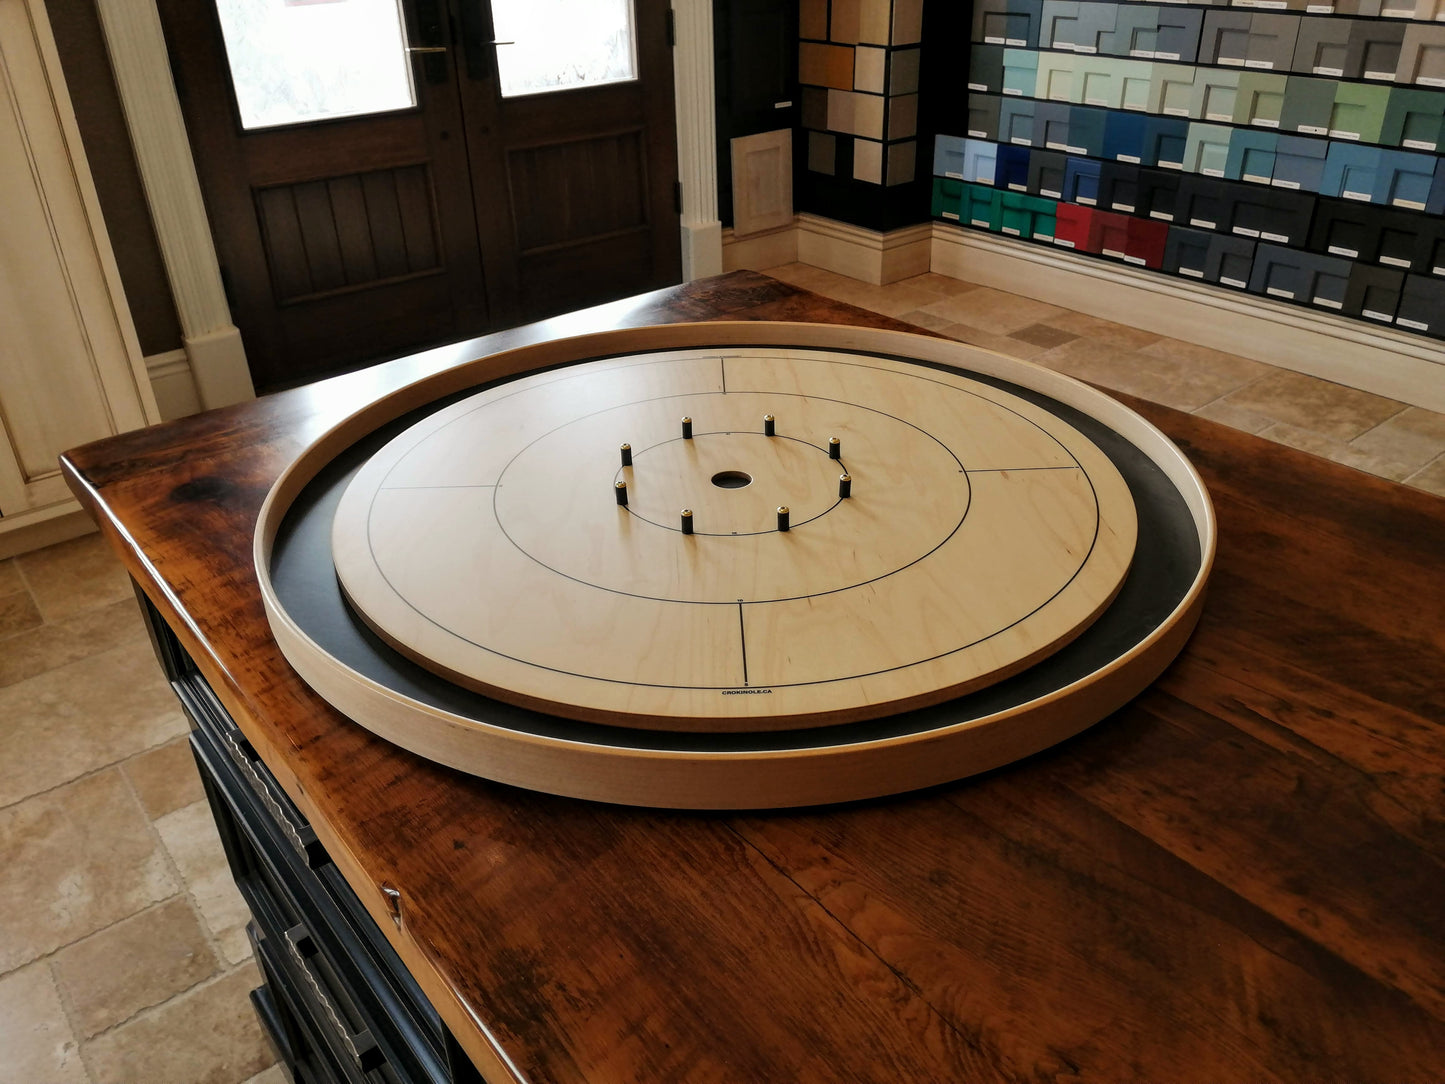 The Crokinole Canada (With Branding) - Tournament Board Game Kit